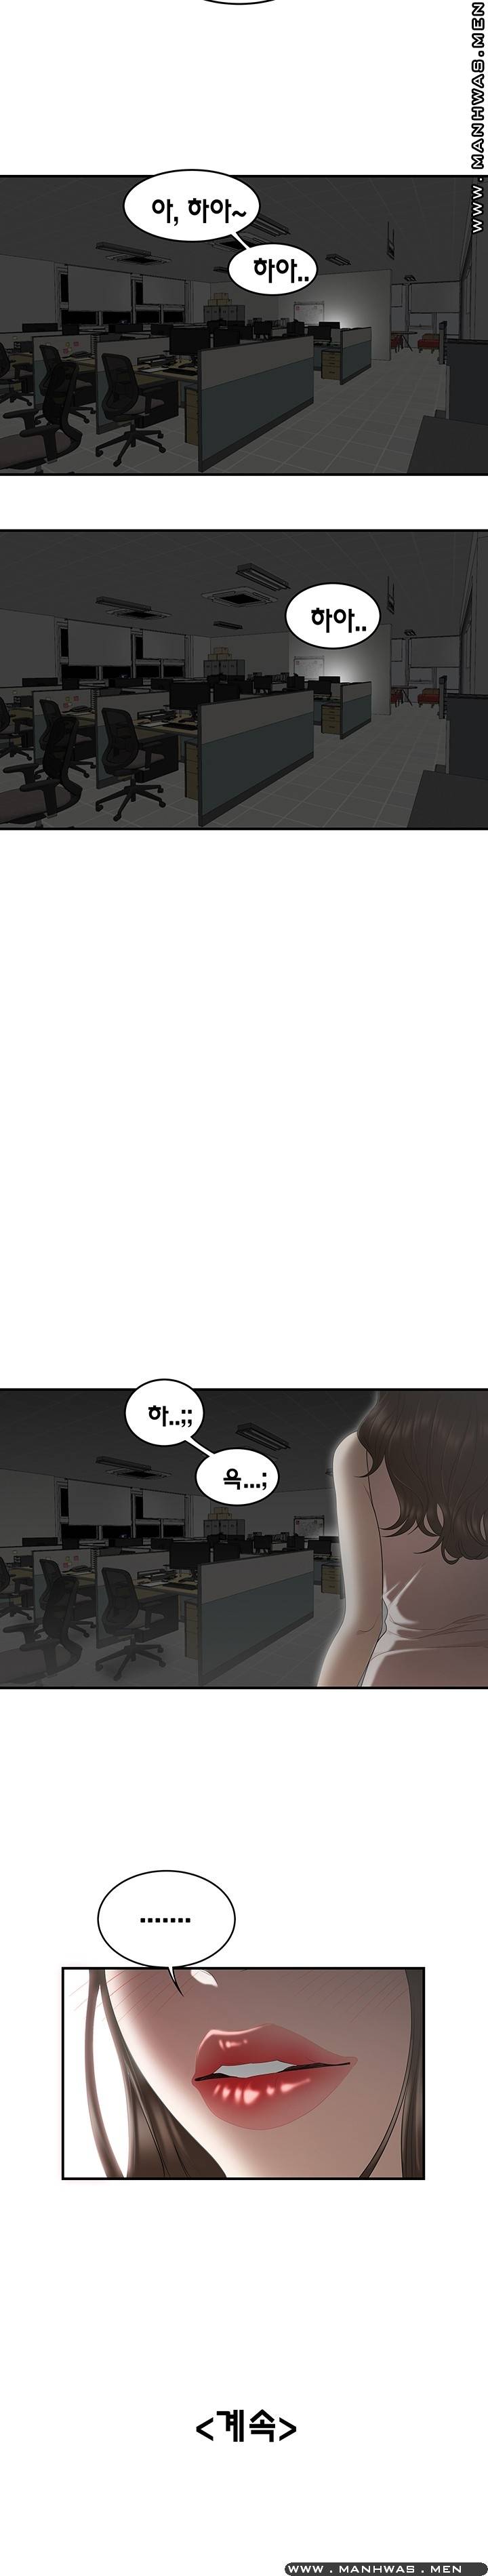 Overpaid Within Raw - Chapter 1 Page 20